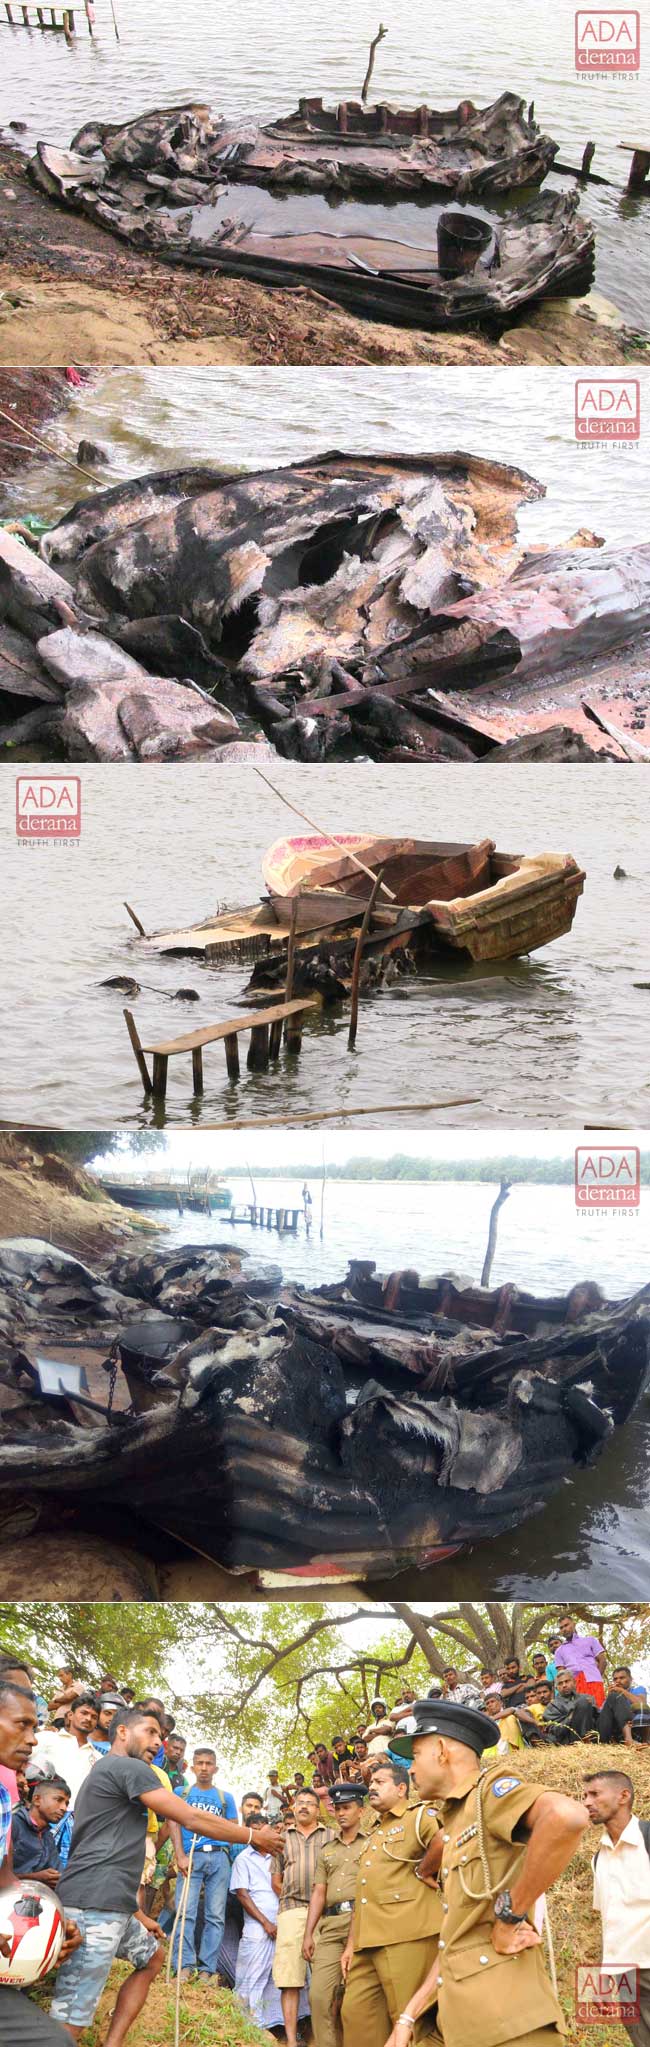 Twenty-five boats used for sand mining torched in Manampitiya